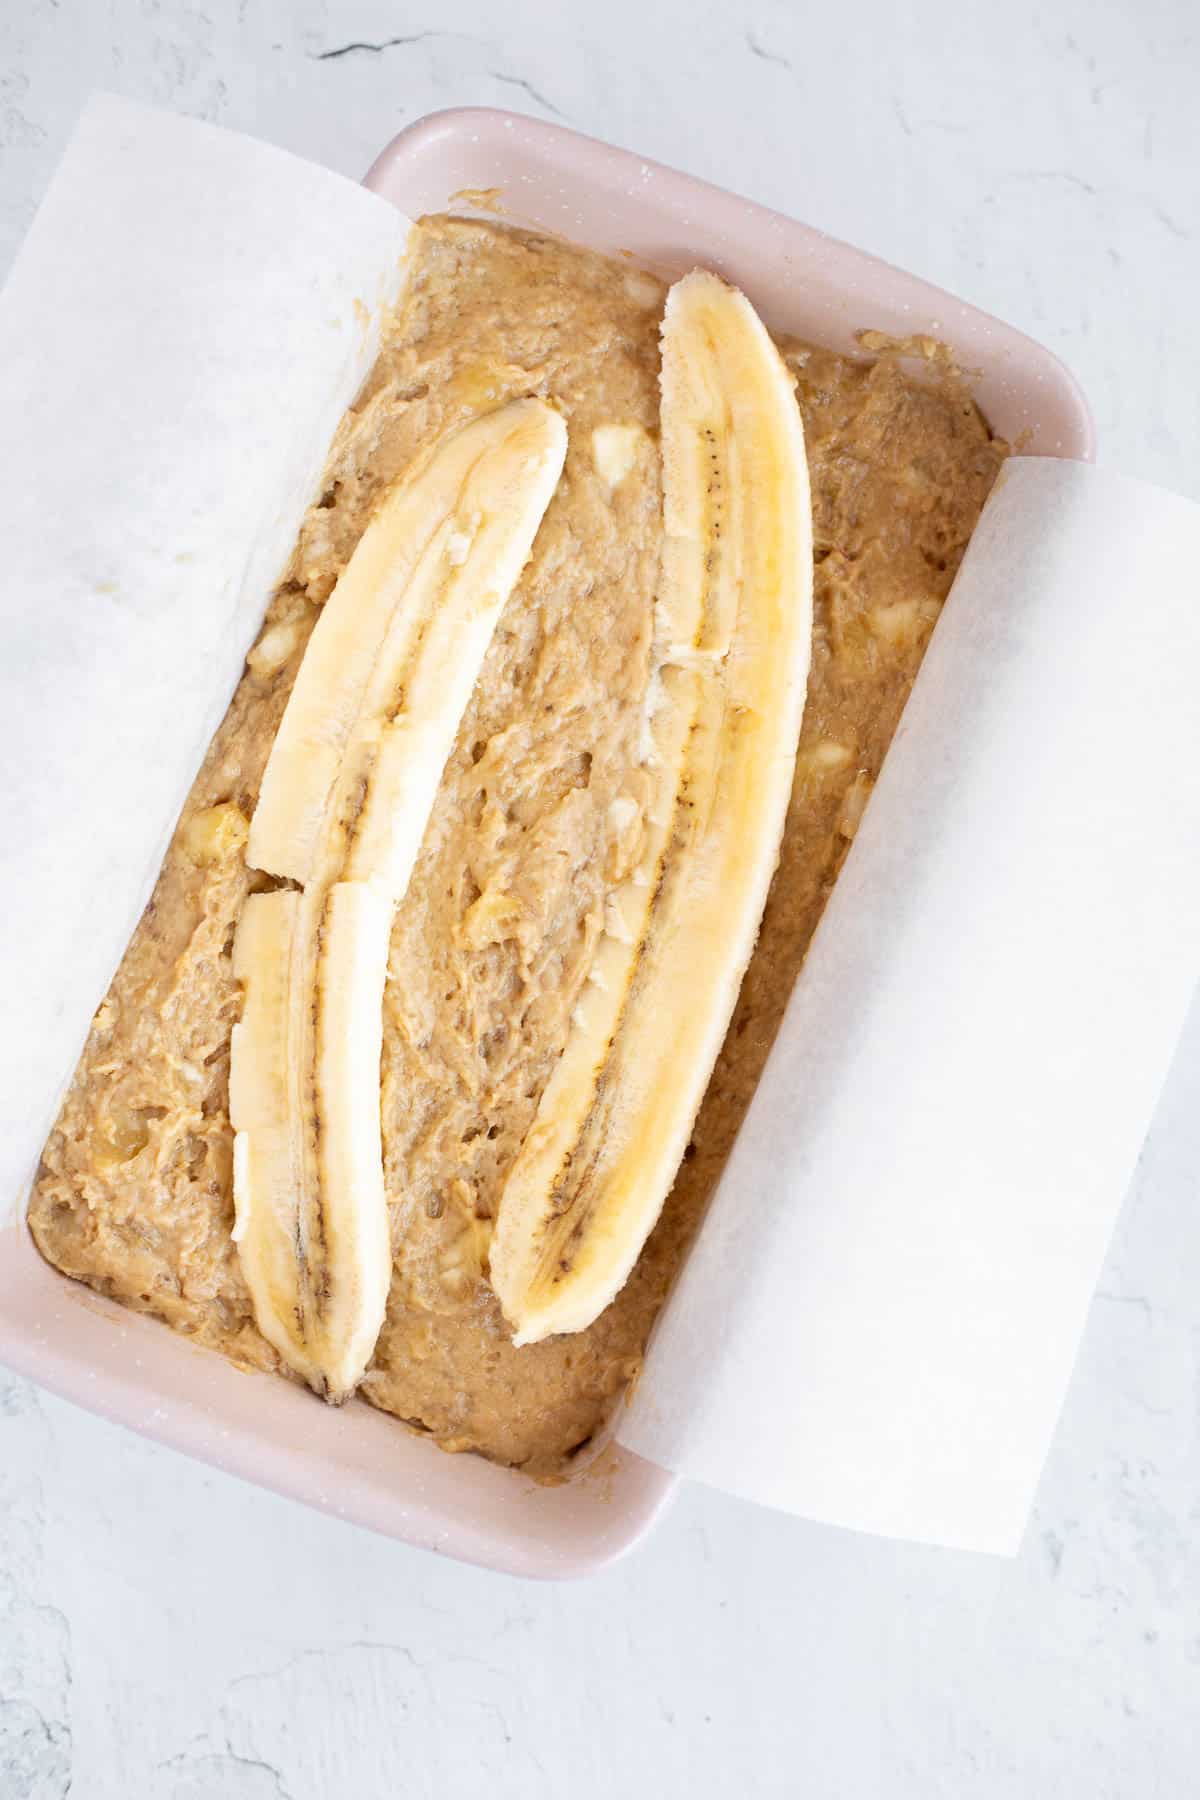 easy banana bread batter in a pink loaf pan topped with half a banana.